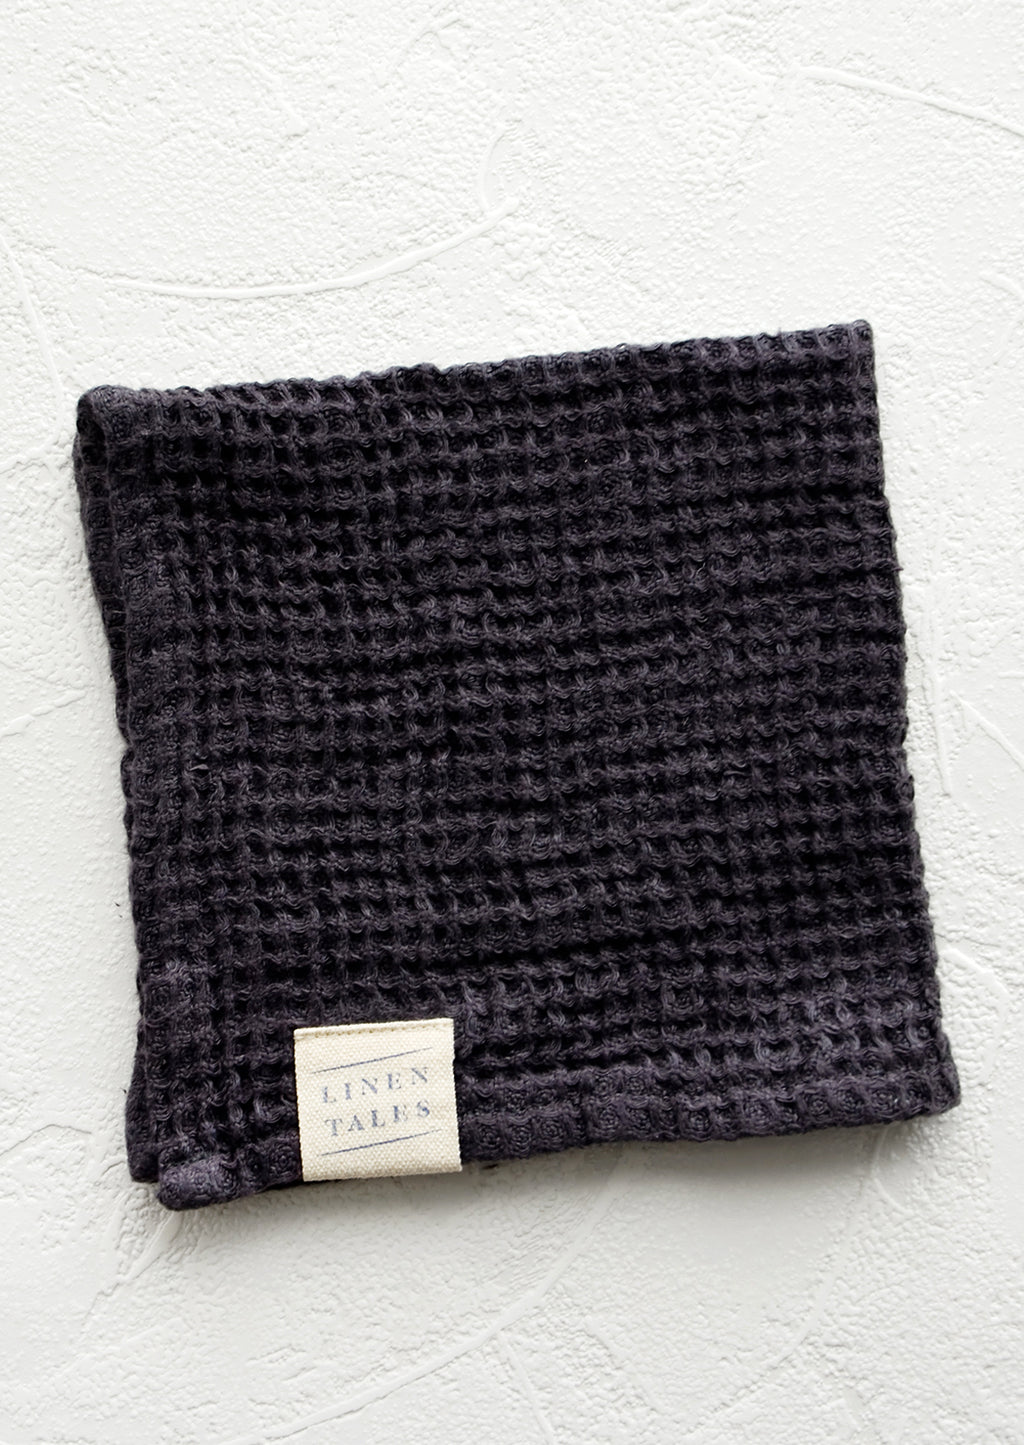 Charcoal: A folded waffle-weave linen washcloth in charcoal with a logo patch.